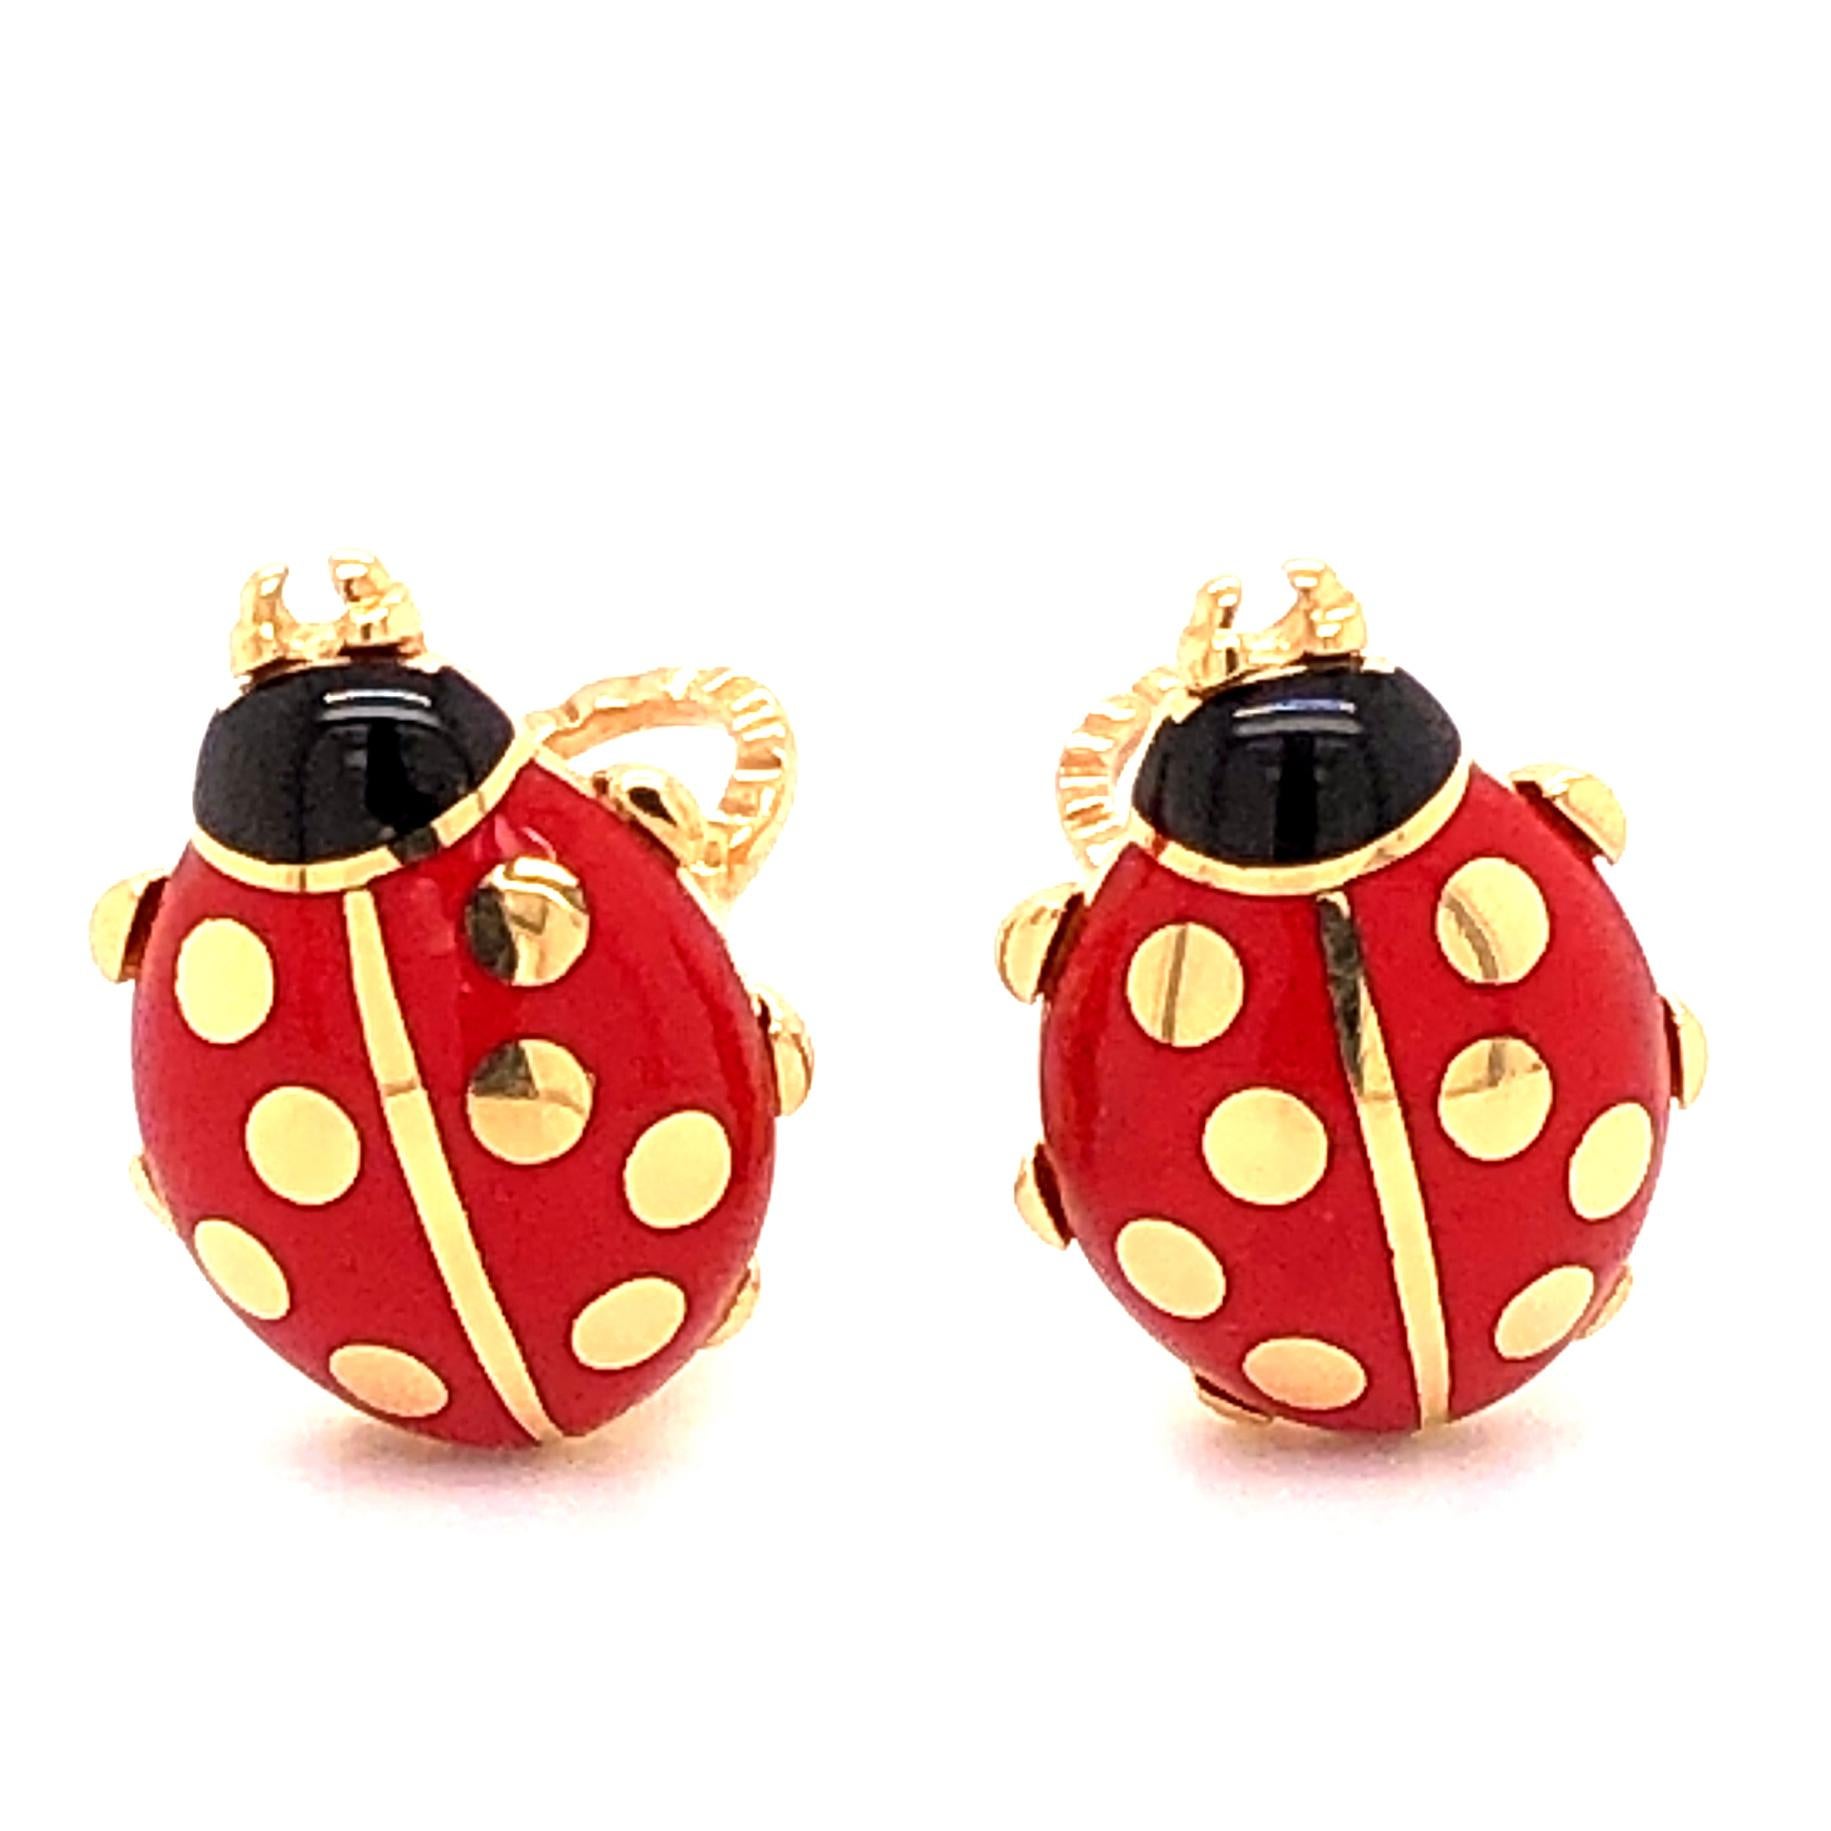 Cartier ladybug earclips with red and black enamelling in 18k yellow gold. The earclips are fun for daily wear and for various occasions. They are signed Cartier, numbered and marked with the 18k gold stamp. 